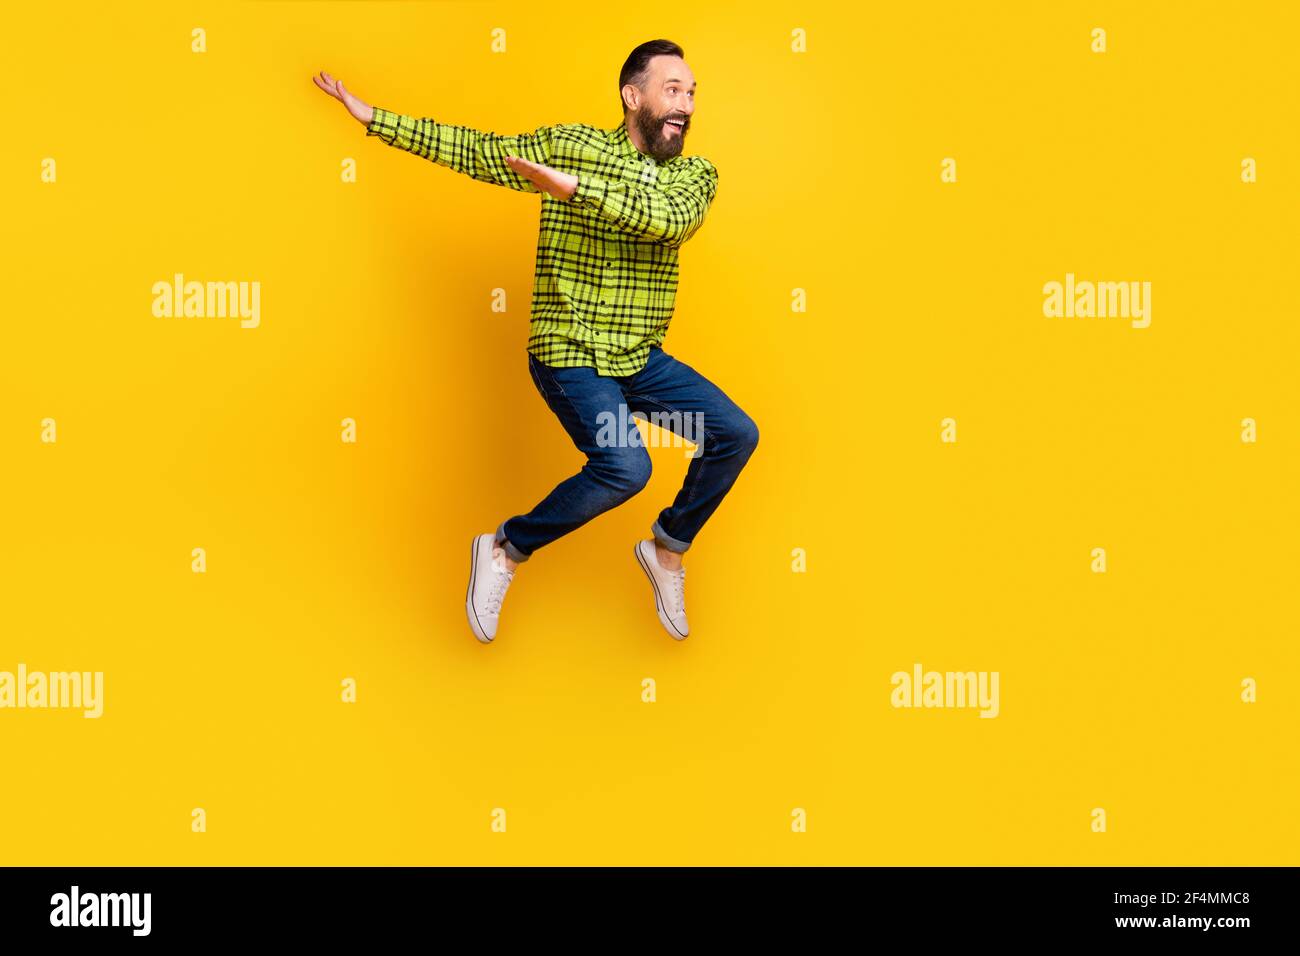 https://c8.alamy.com/comp/2F4MMC8/full-length-photo-of-mature-man-happy-positive-smile-jump-up-dance-dab-hip-hop-isolated-over-yellow-color-background-2F4MMC8.jpg